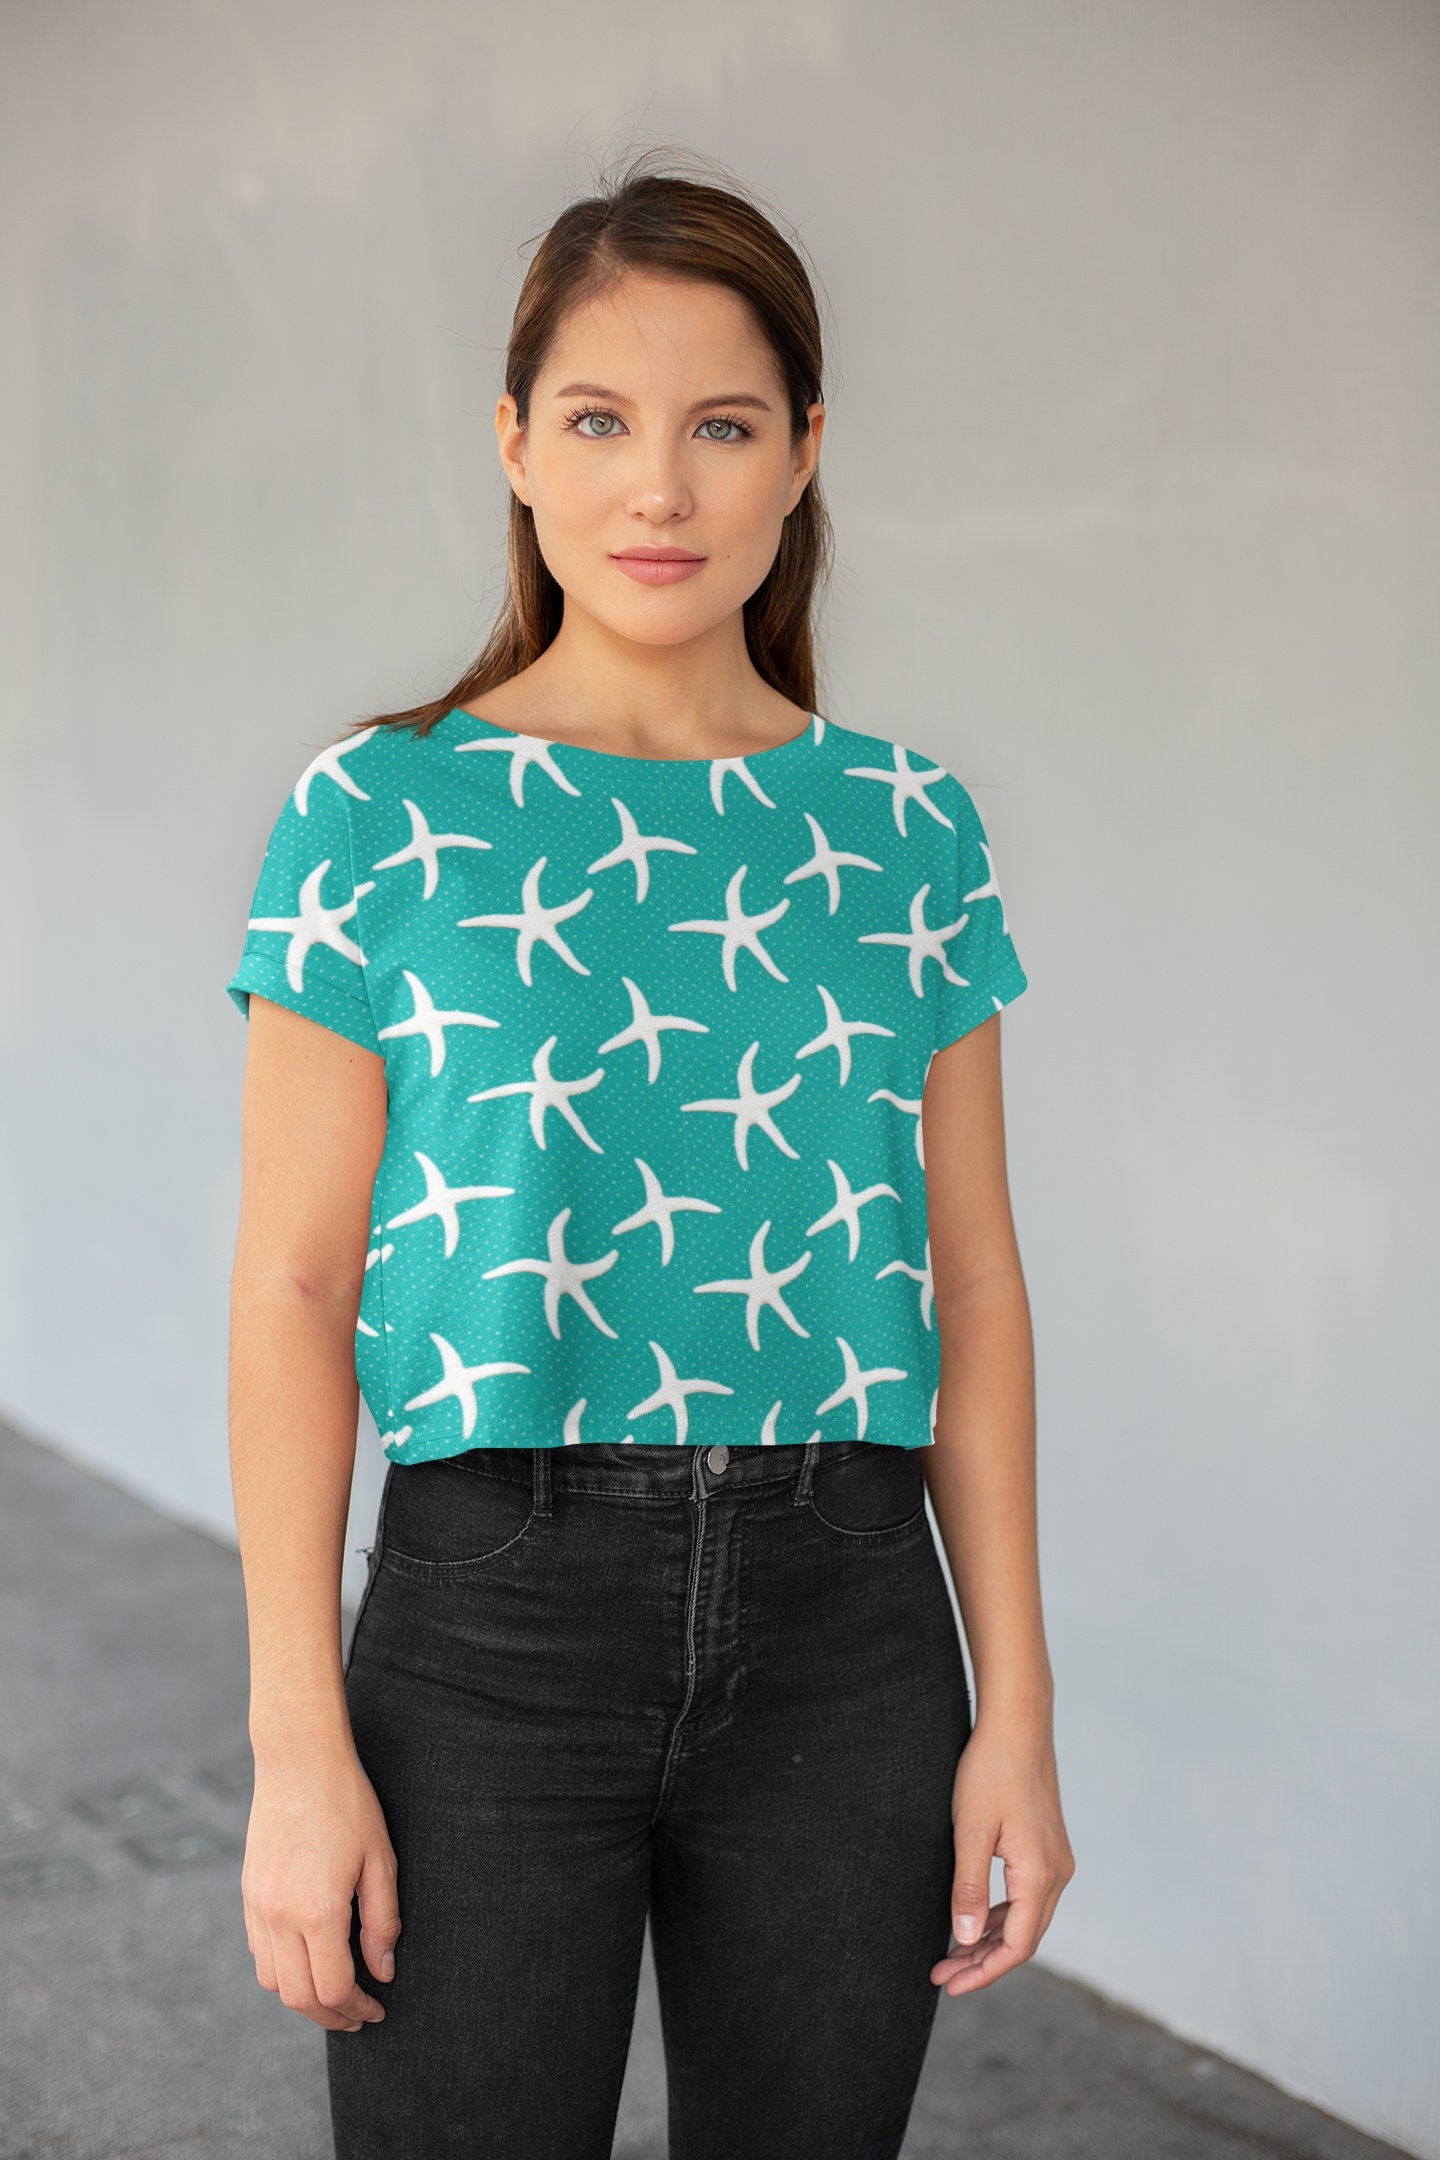 Stay Cool and Stylish: Summer Aqua Crop Tee - Trendy, Casual, and Comfortable! Crop tee with Coral designs, Fashionable and Fun Crop Tee